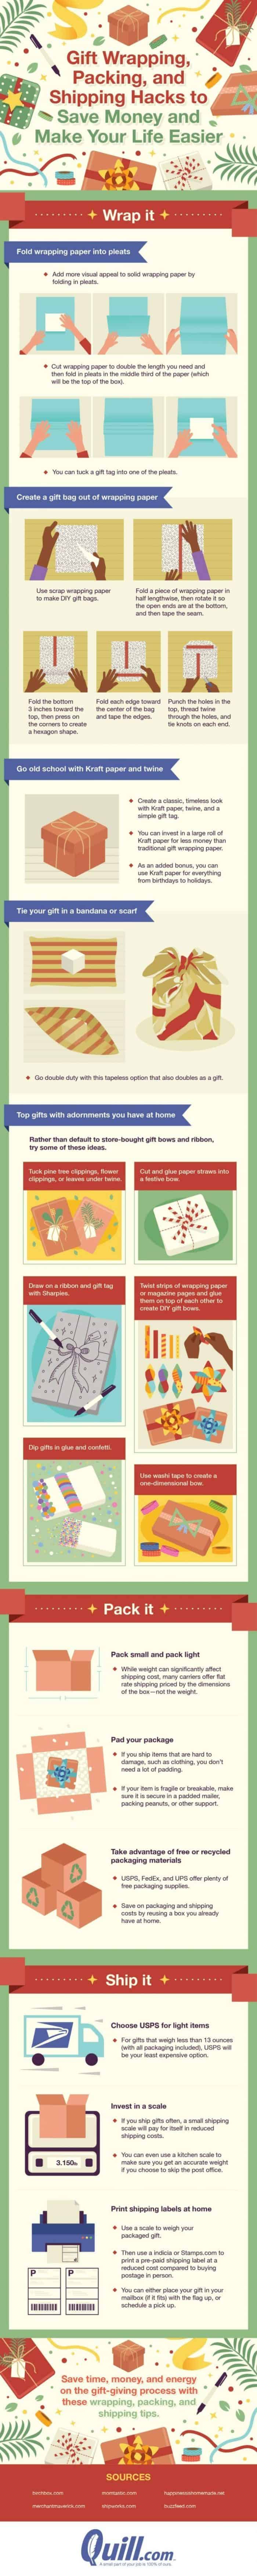 DIY ideas for saving money on wrapping and shipping gifts